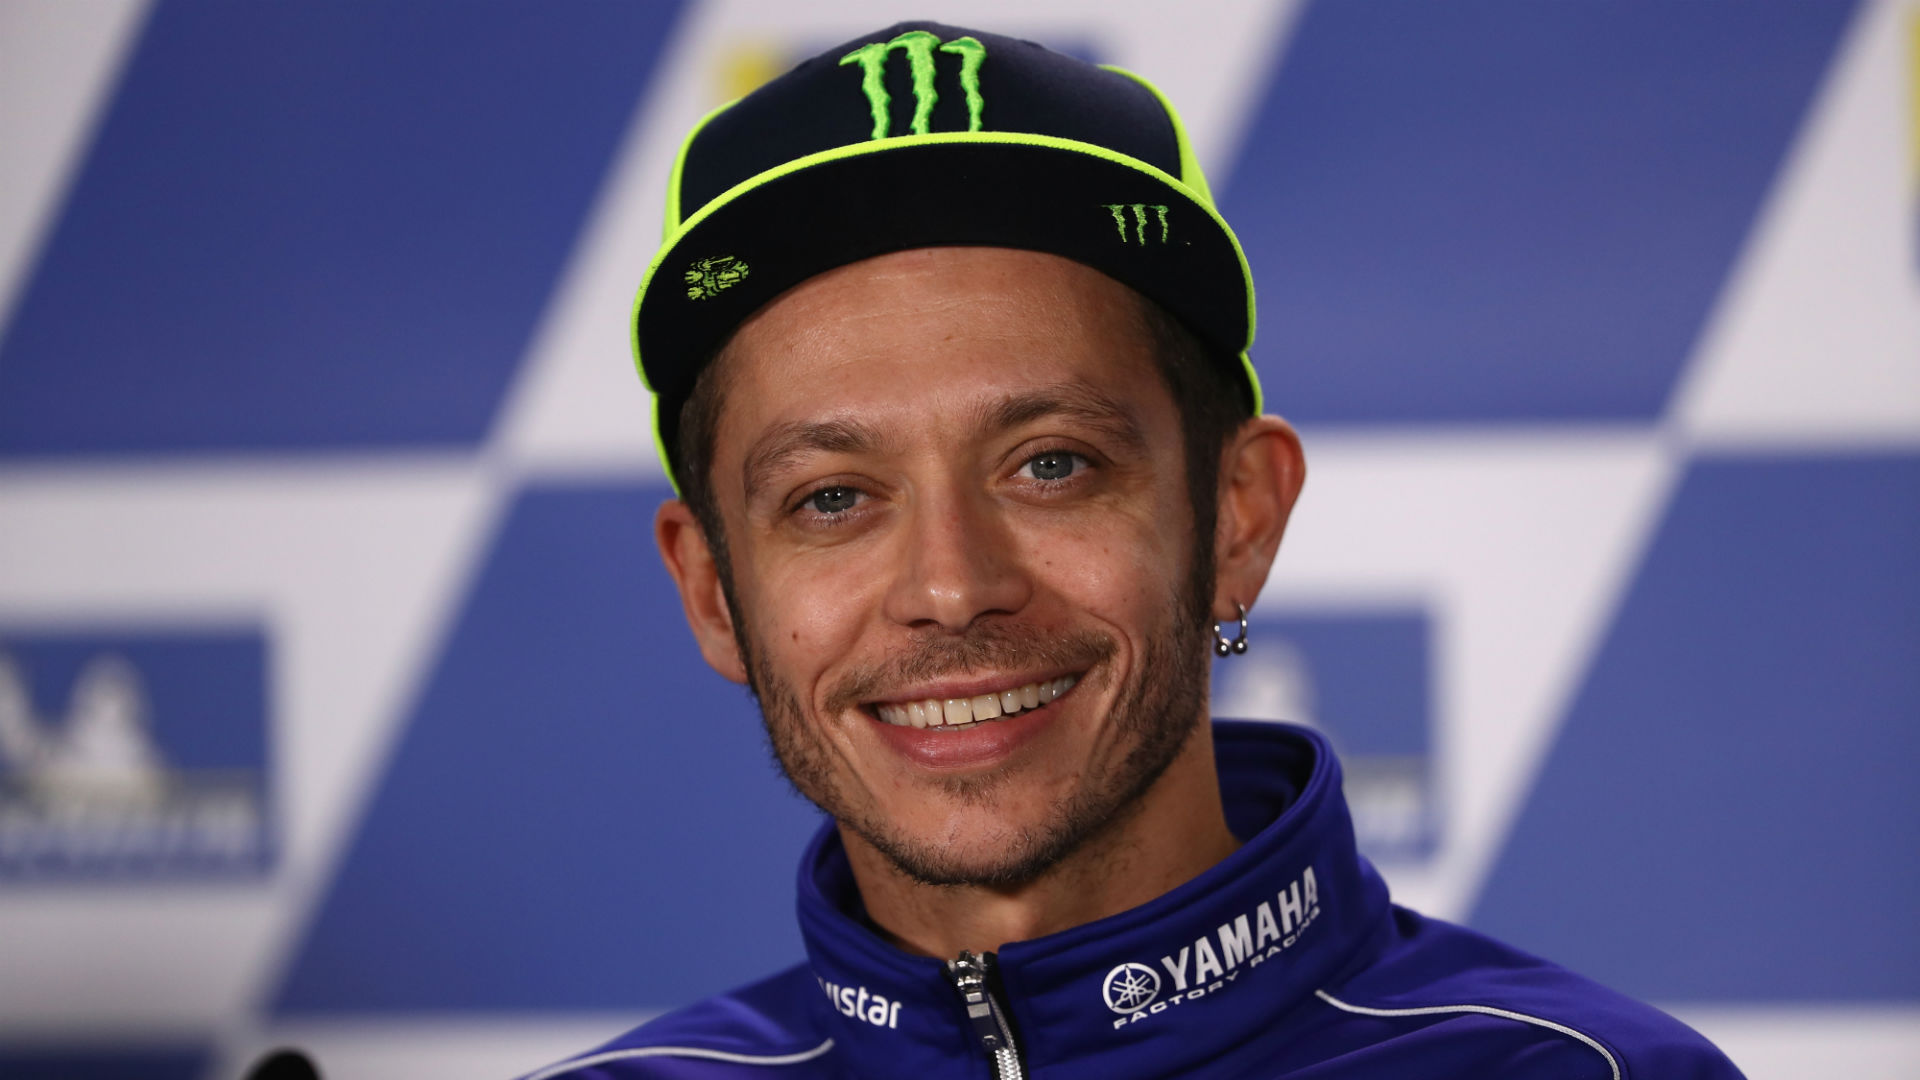 To mark Valentino Rossi's 40th birthday, we take a look at the best stats about the Movistar Yamaha rider and MotoGP icon.